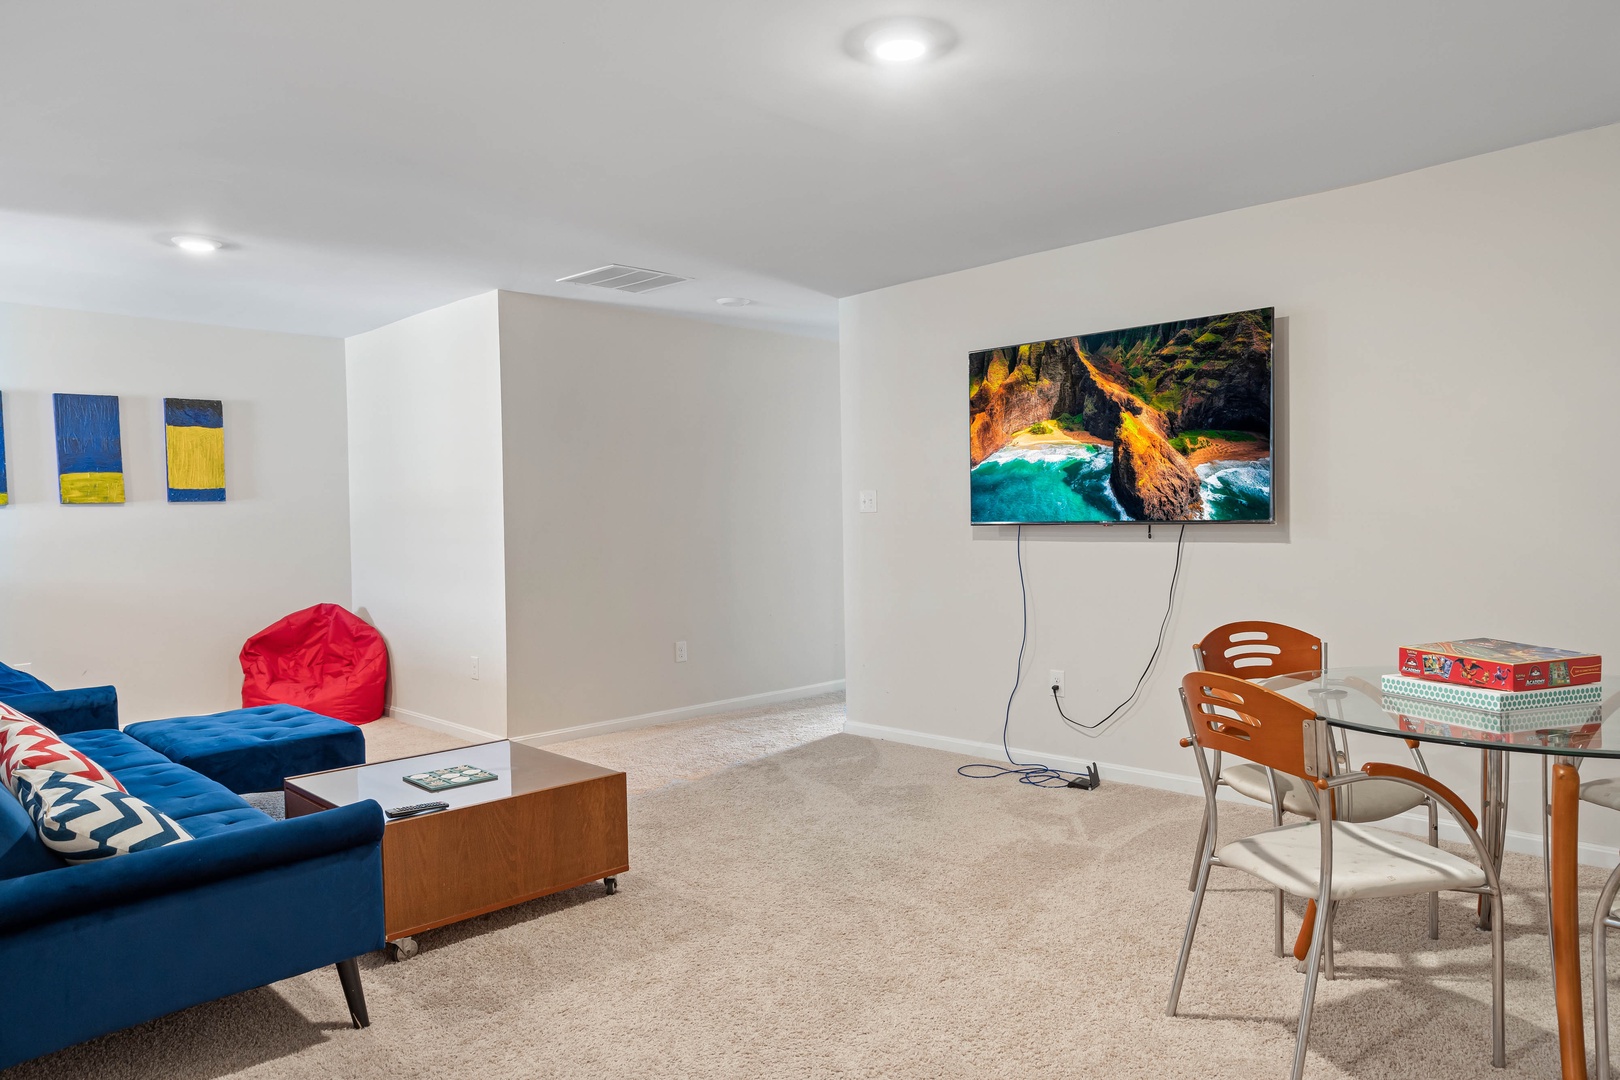 Lounge the day away or break out the board games in the loft game room